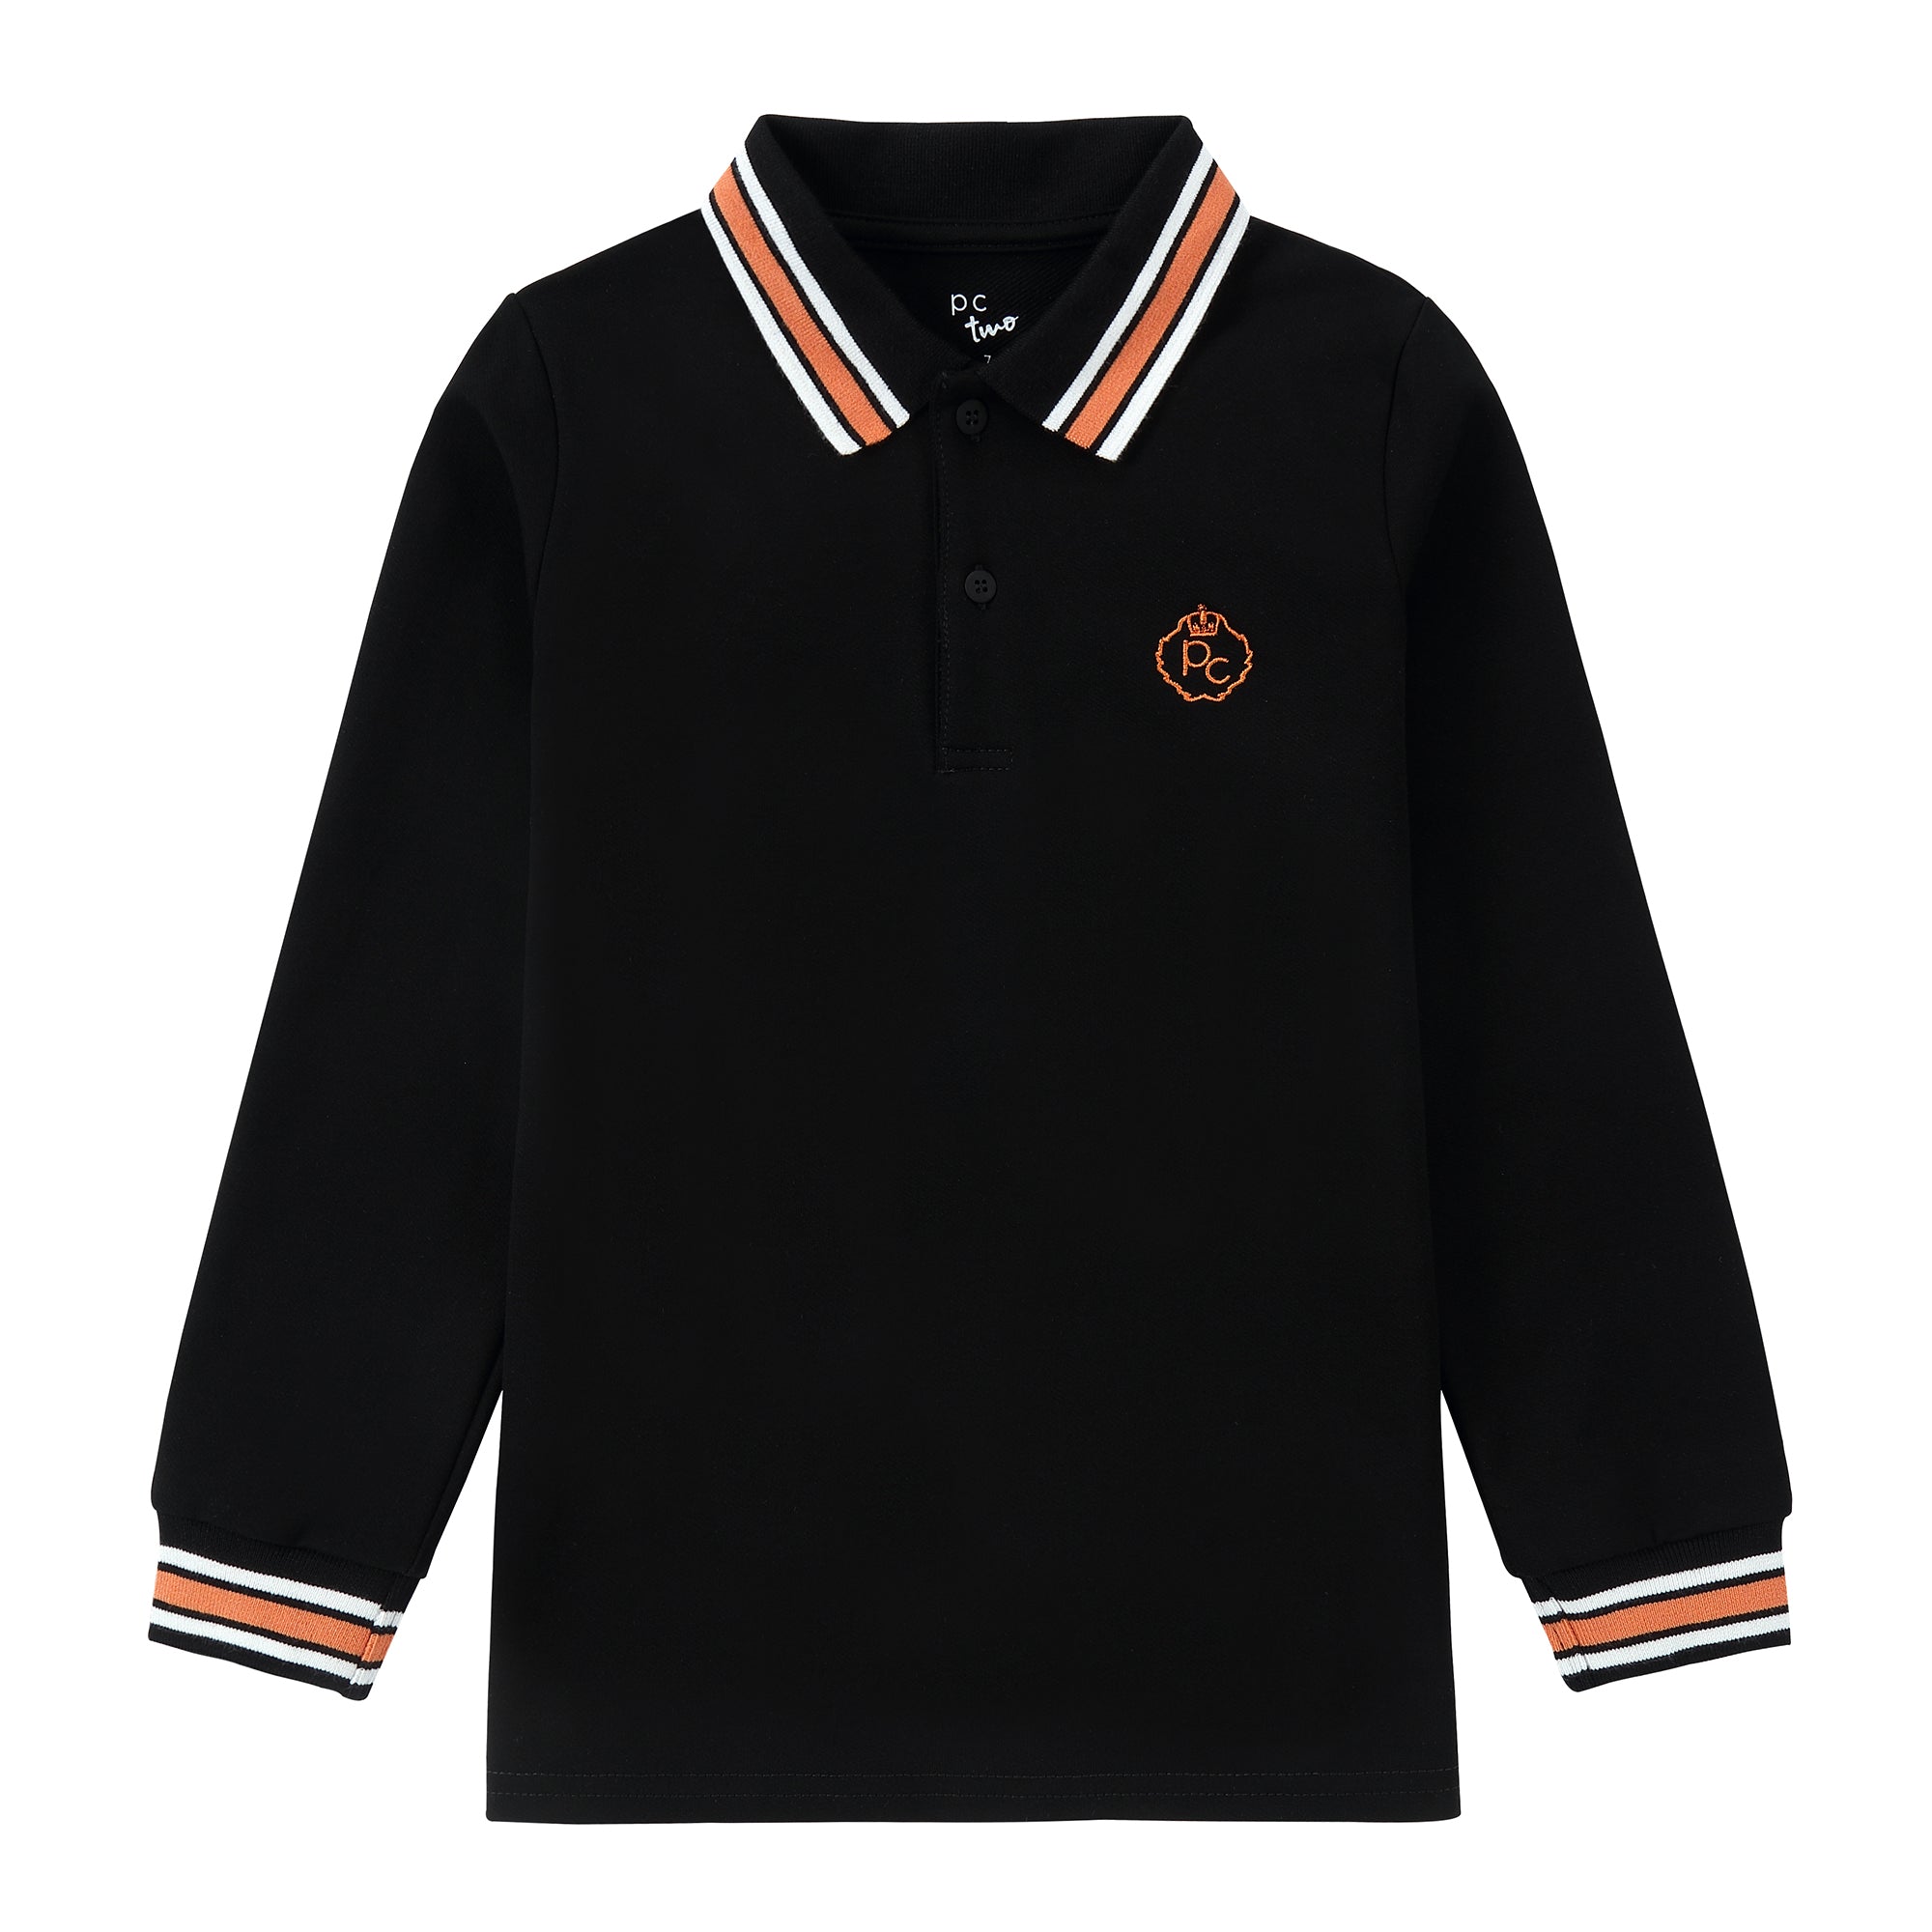 Black Long Sleeve Polo With Orange and White Accents